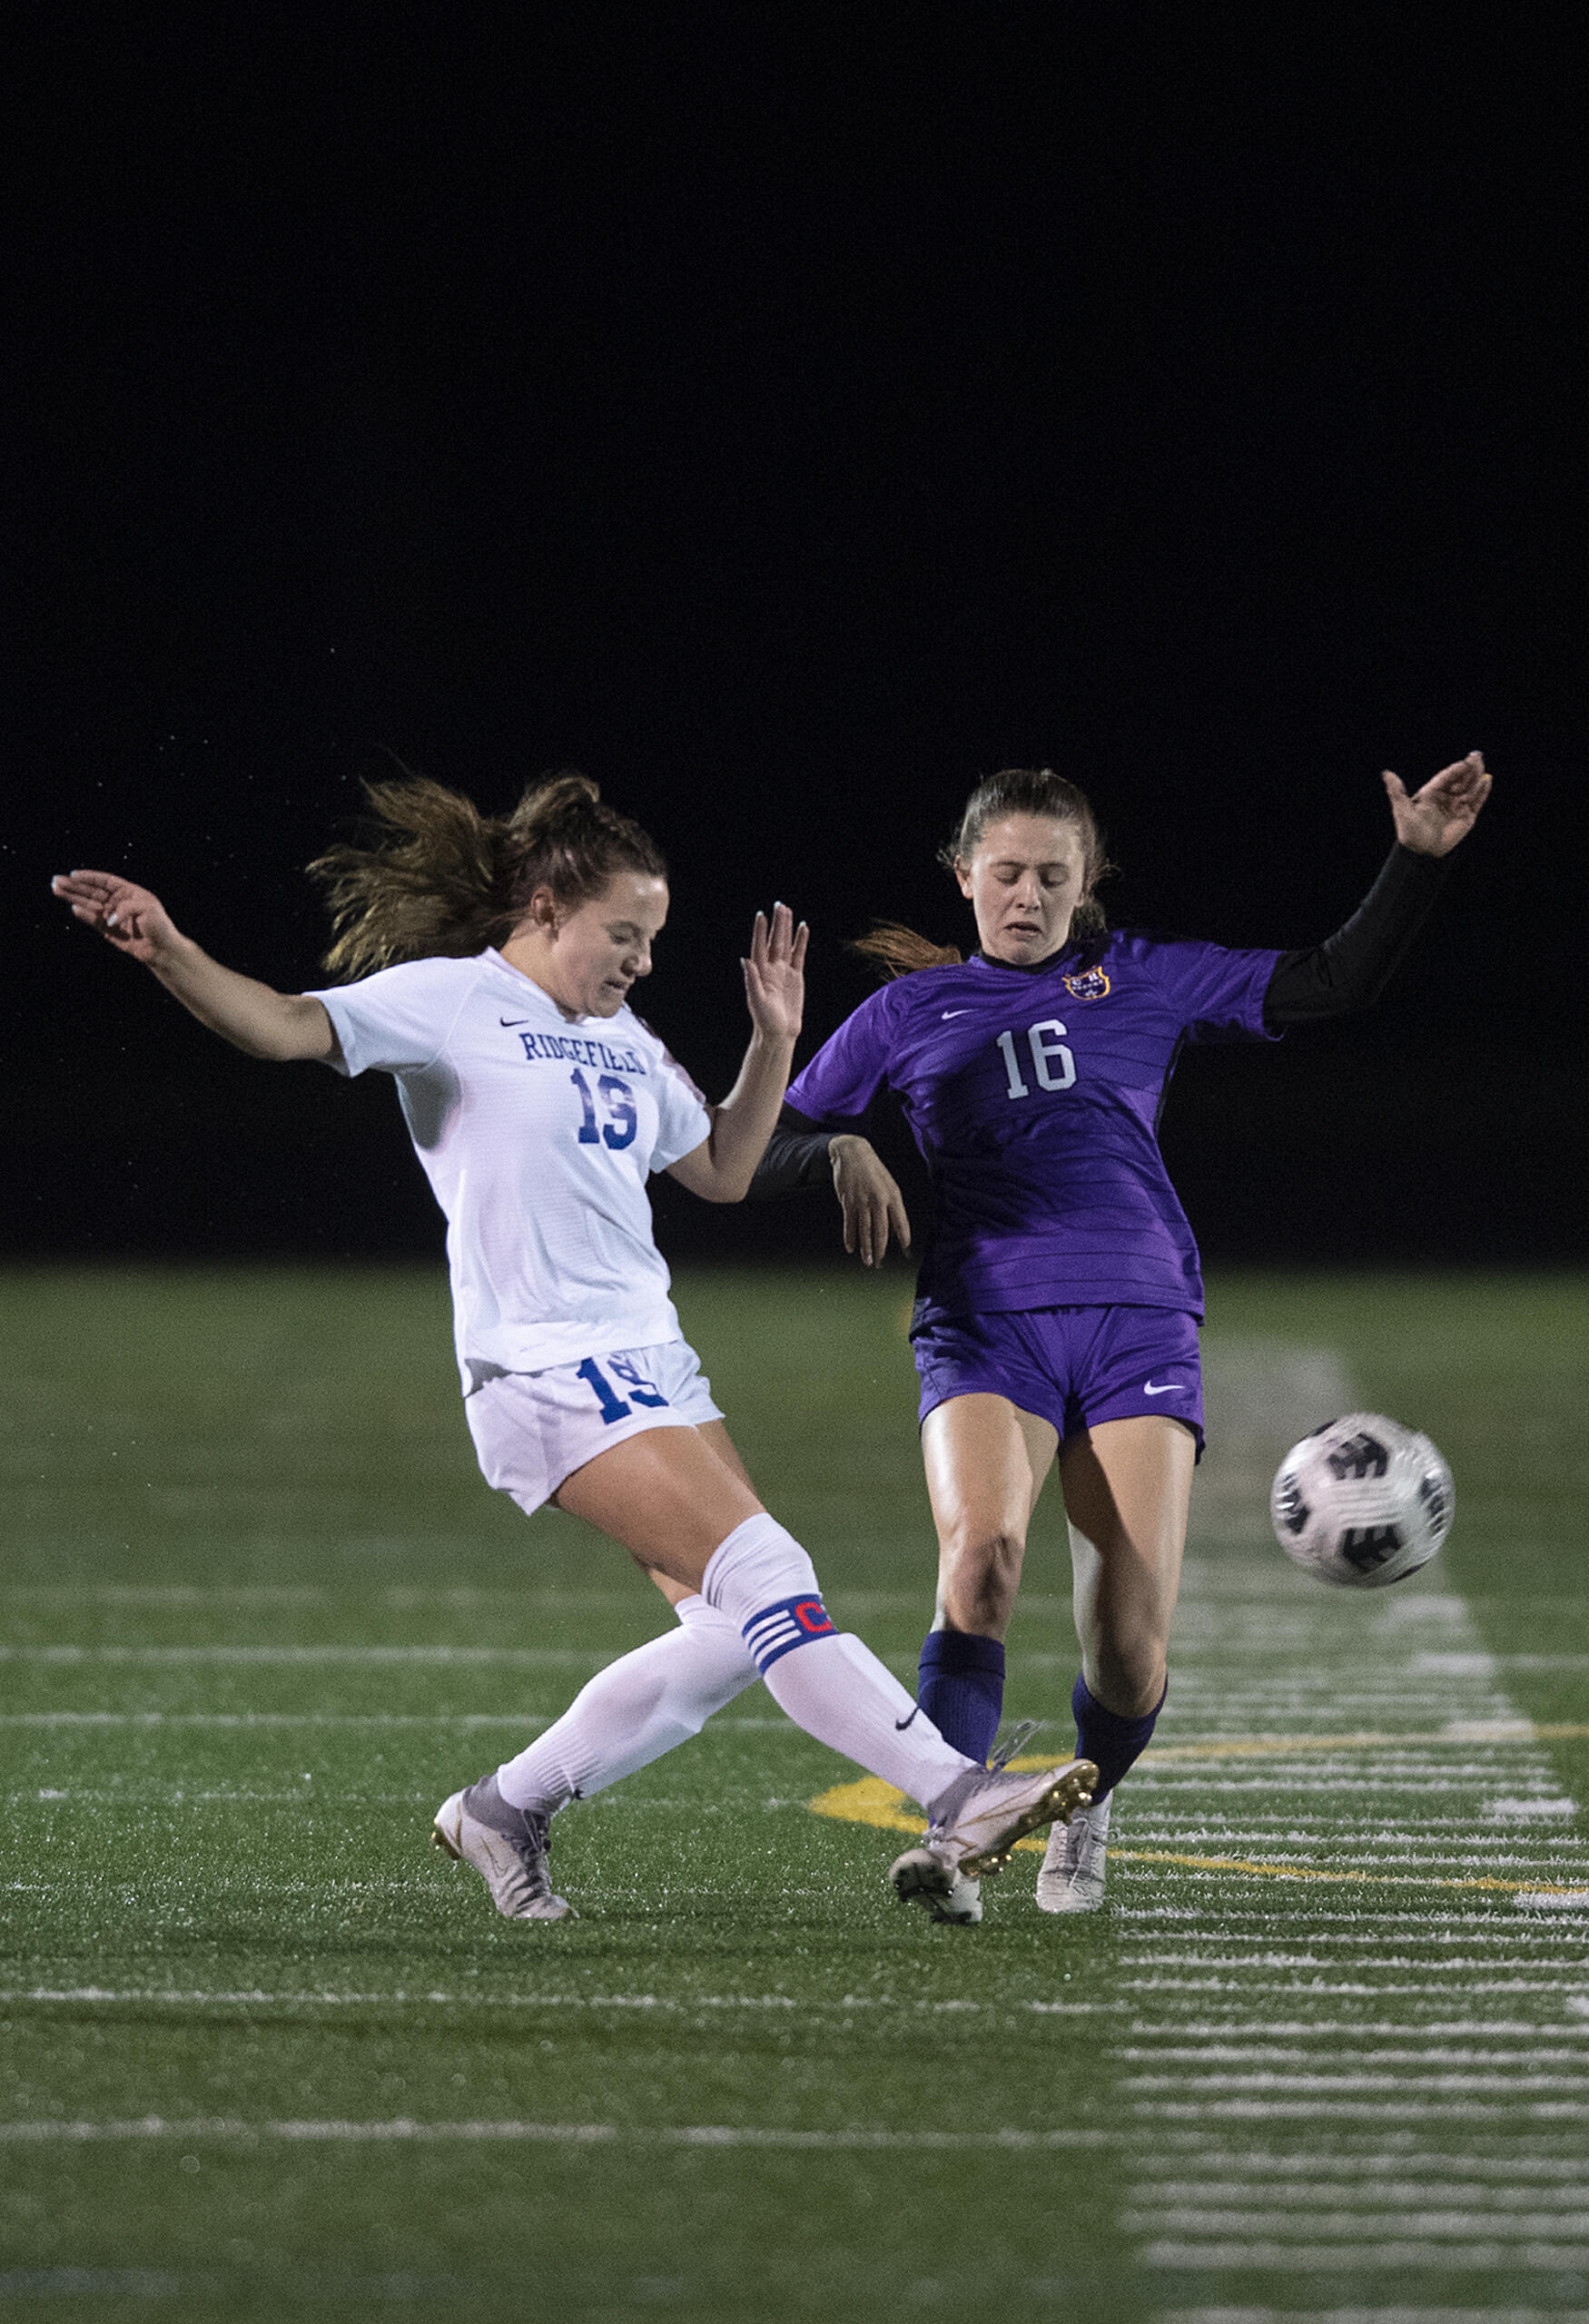 Ridgefield's Paytn Barnette (19) and Columbia River's Kinzi Drake (16) battle for the ball in the first half at Columbia River High School on Tuesday night, Oct. 12, 2021.